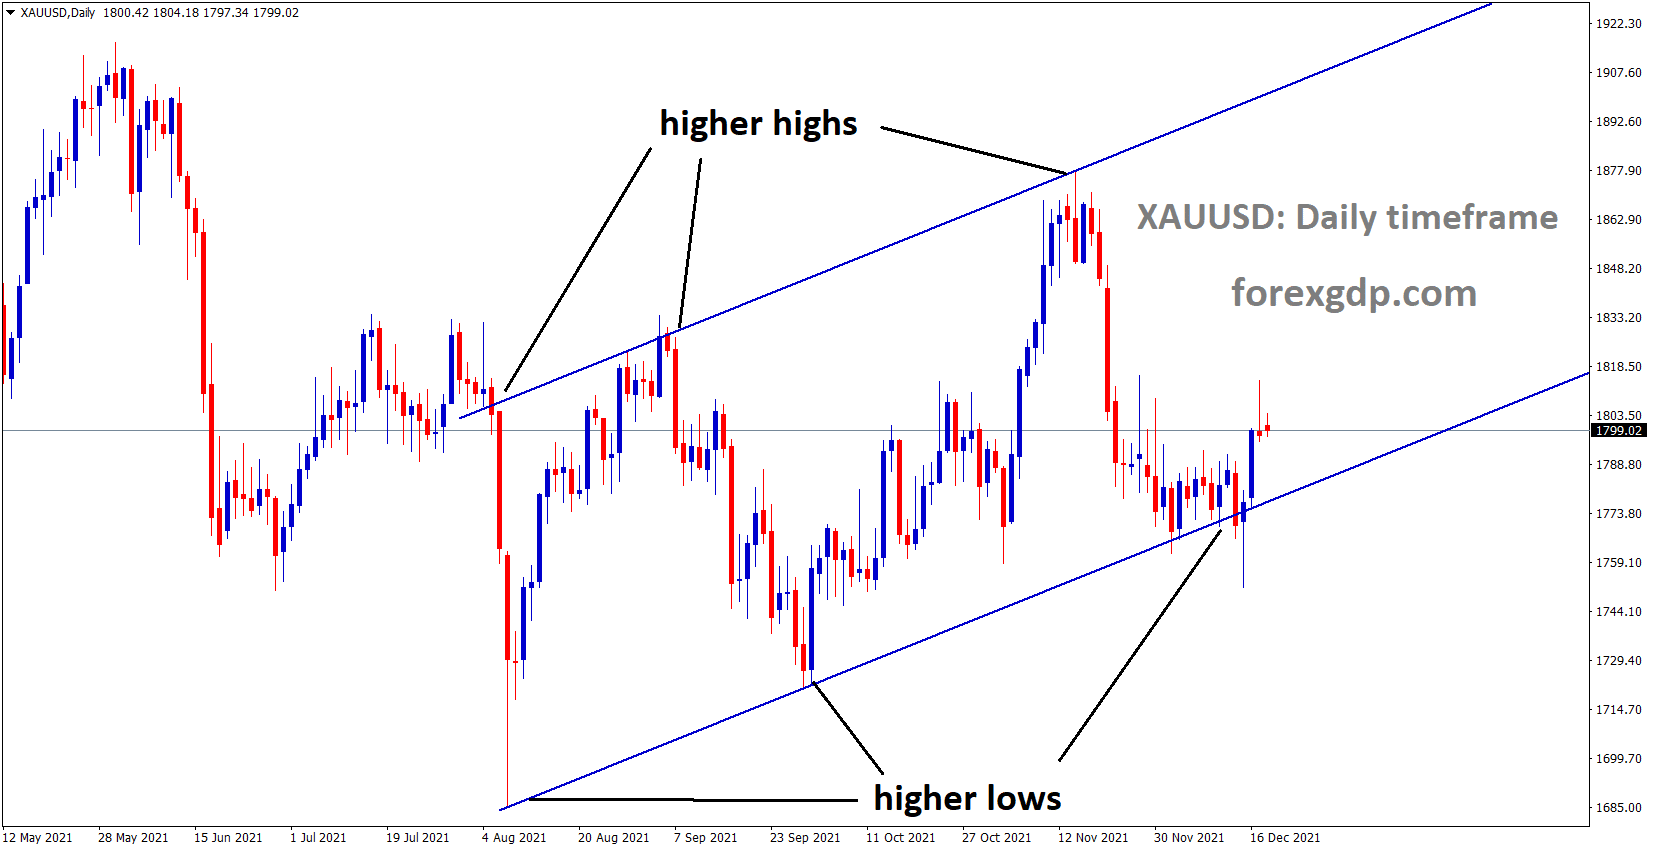 XAUUSD is moving in an Ascending channel and the market has rebounded from the higher low area of the channel 1